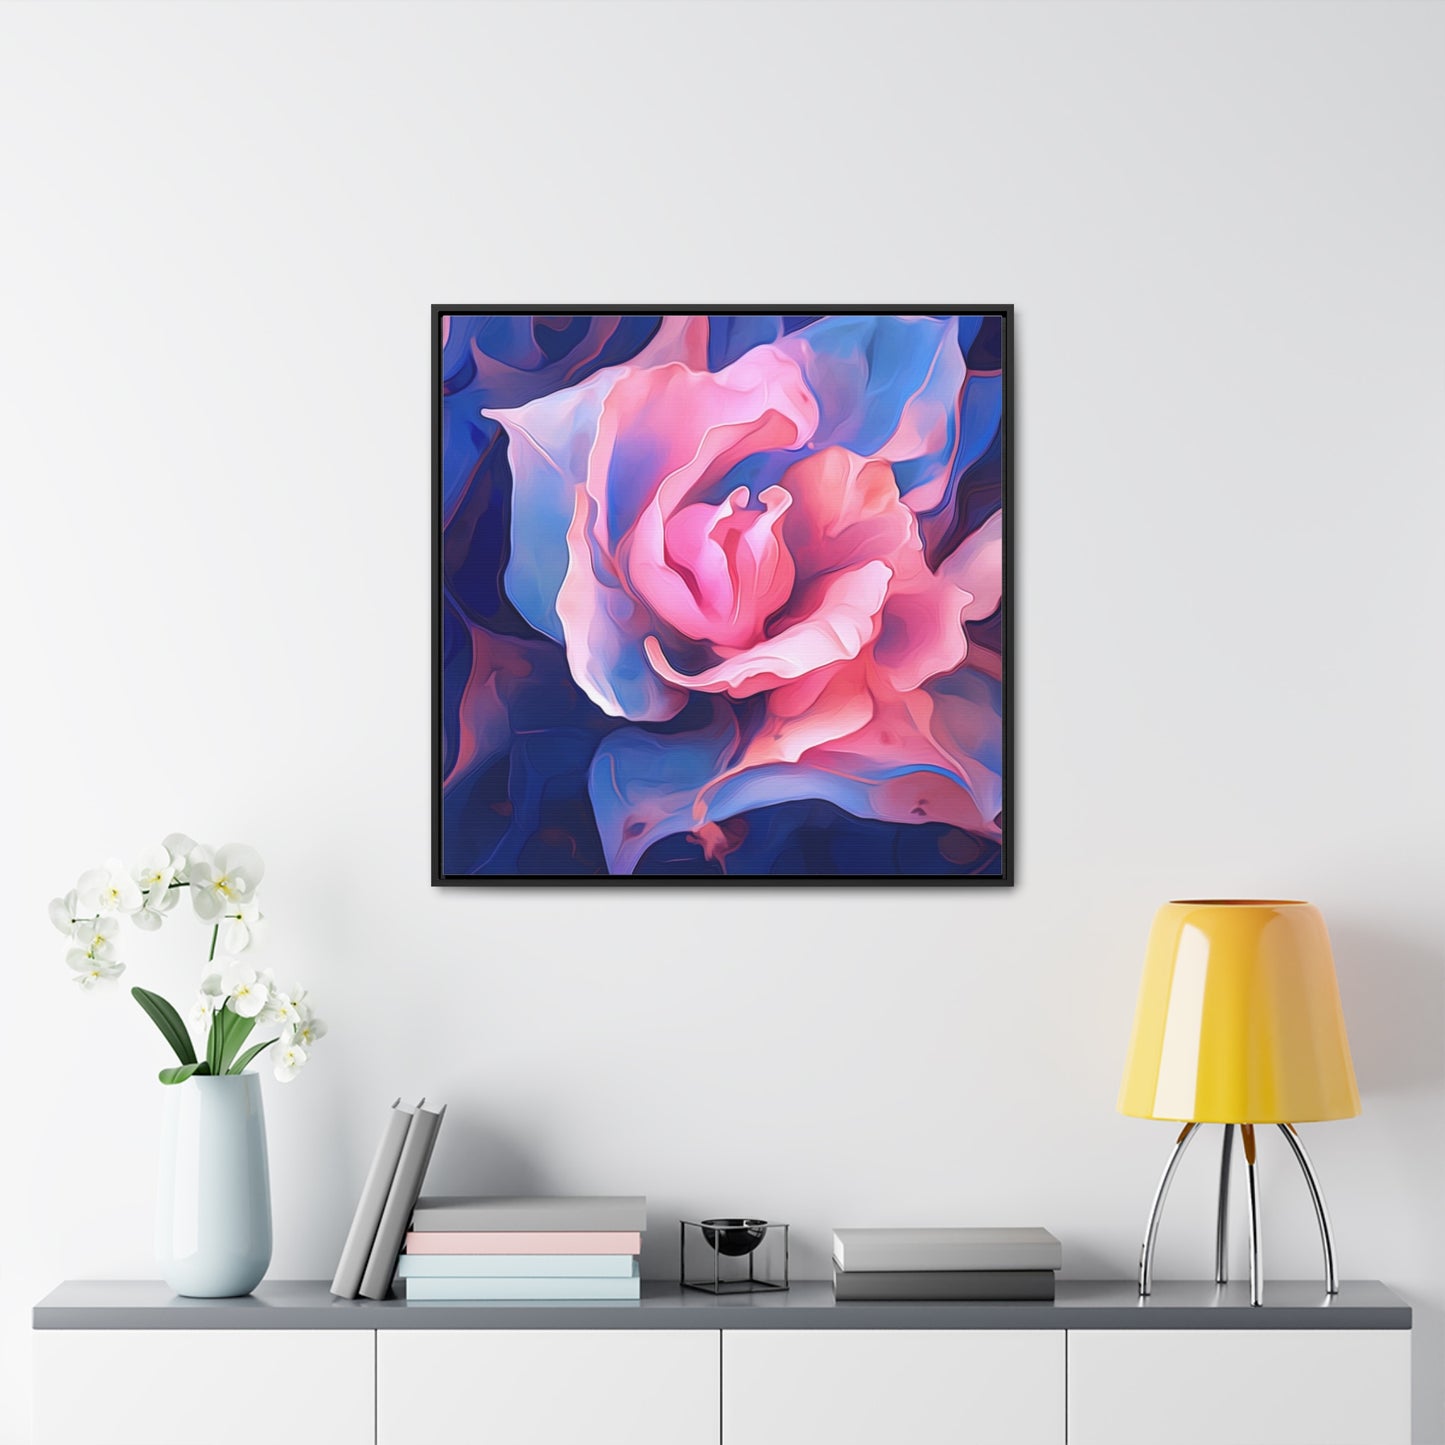 Gallery Canvas Wraps, Square Frame Pink & Blue Tulip Rose 1